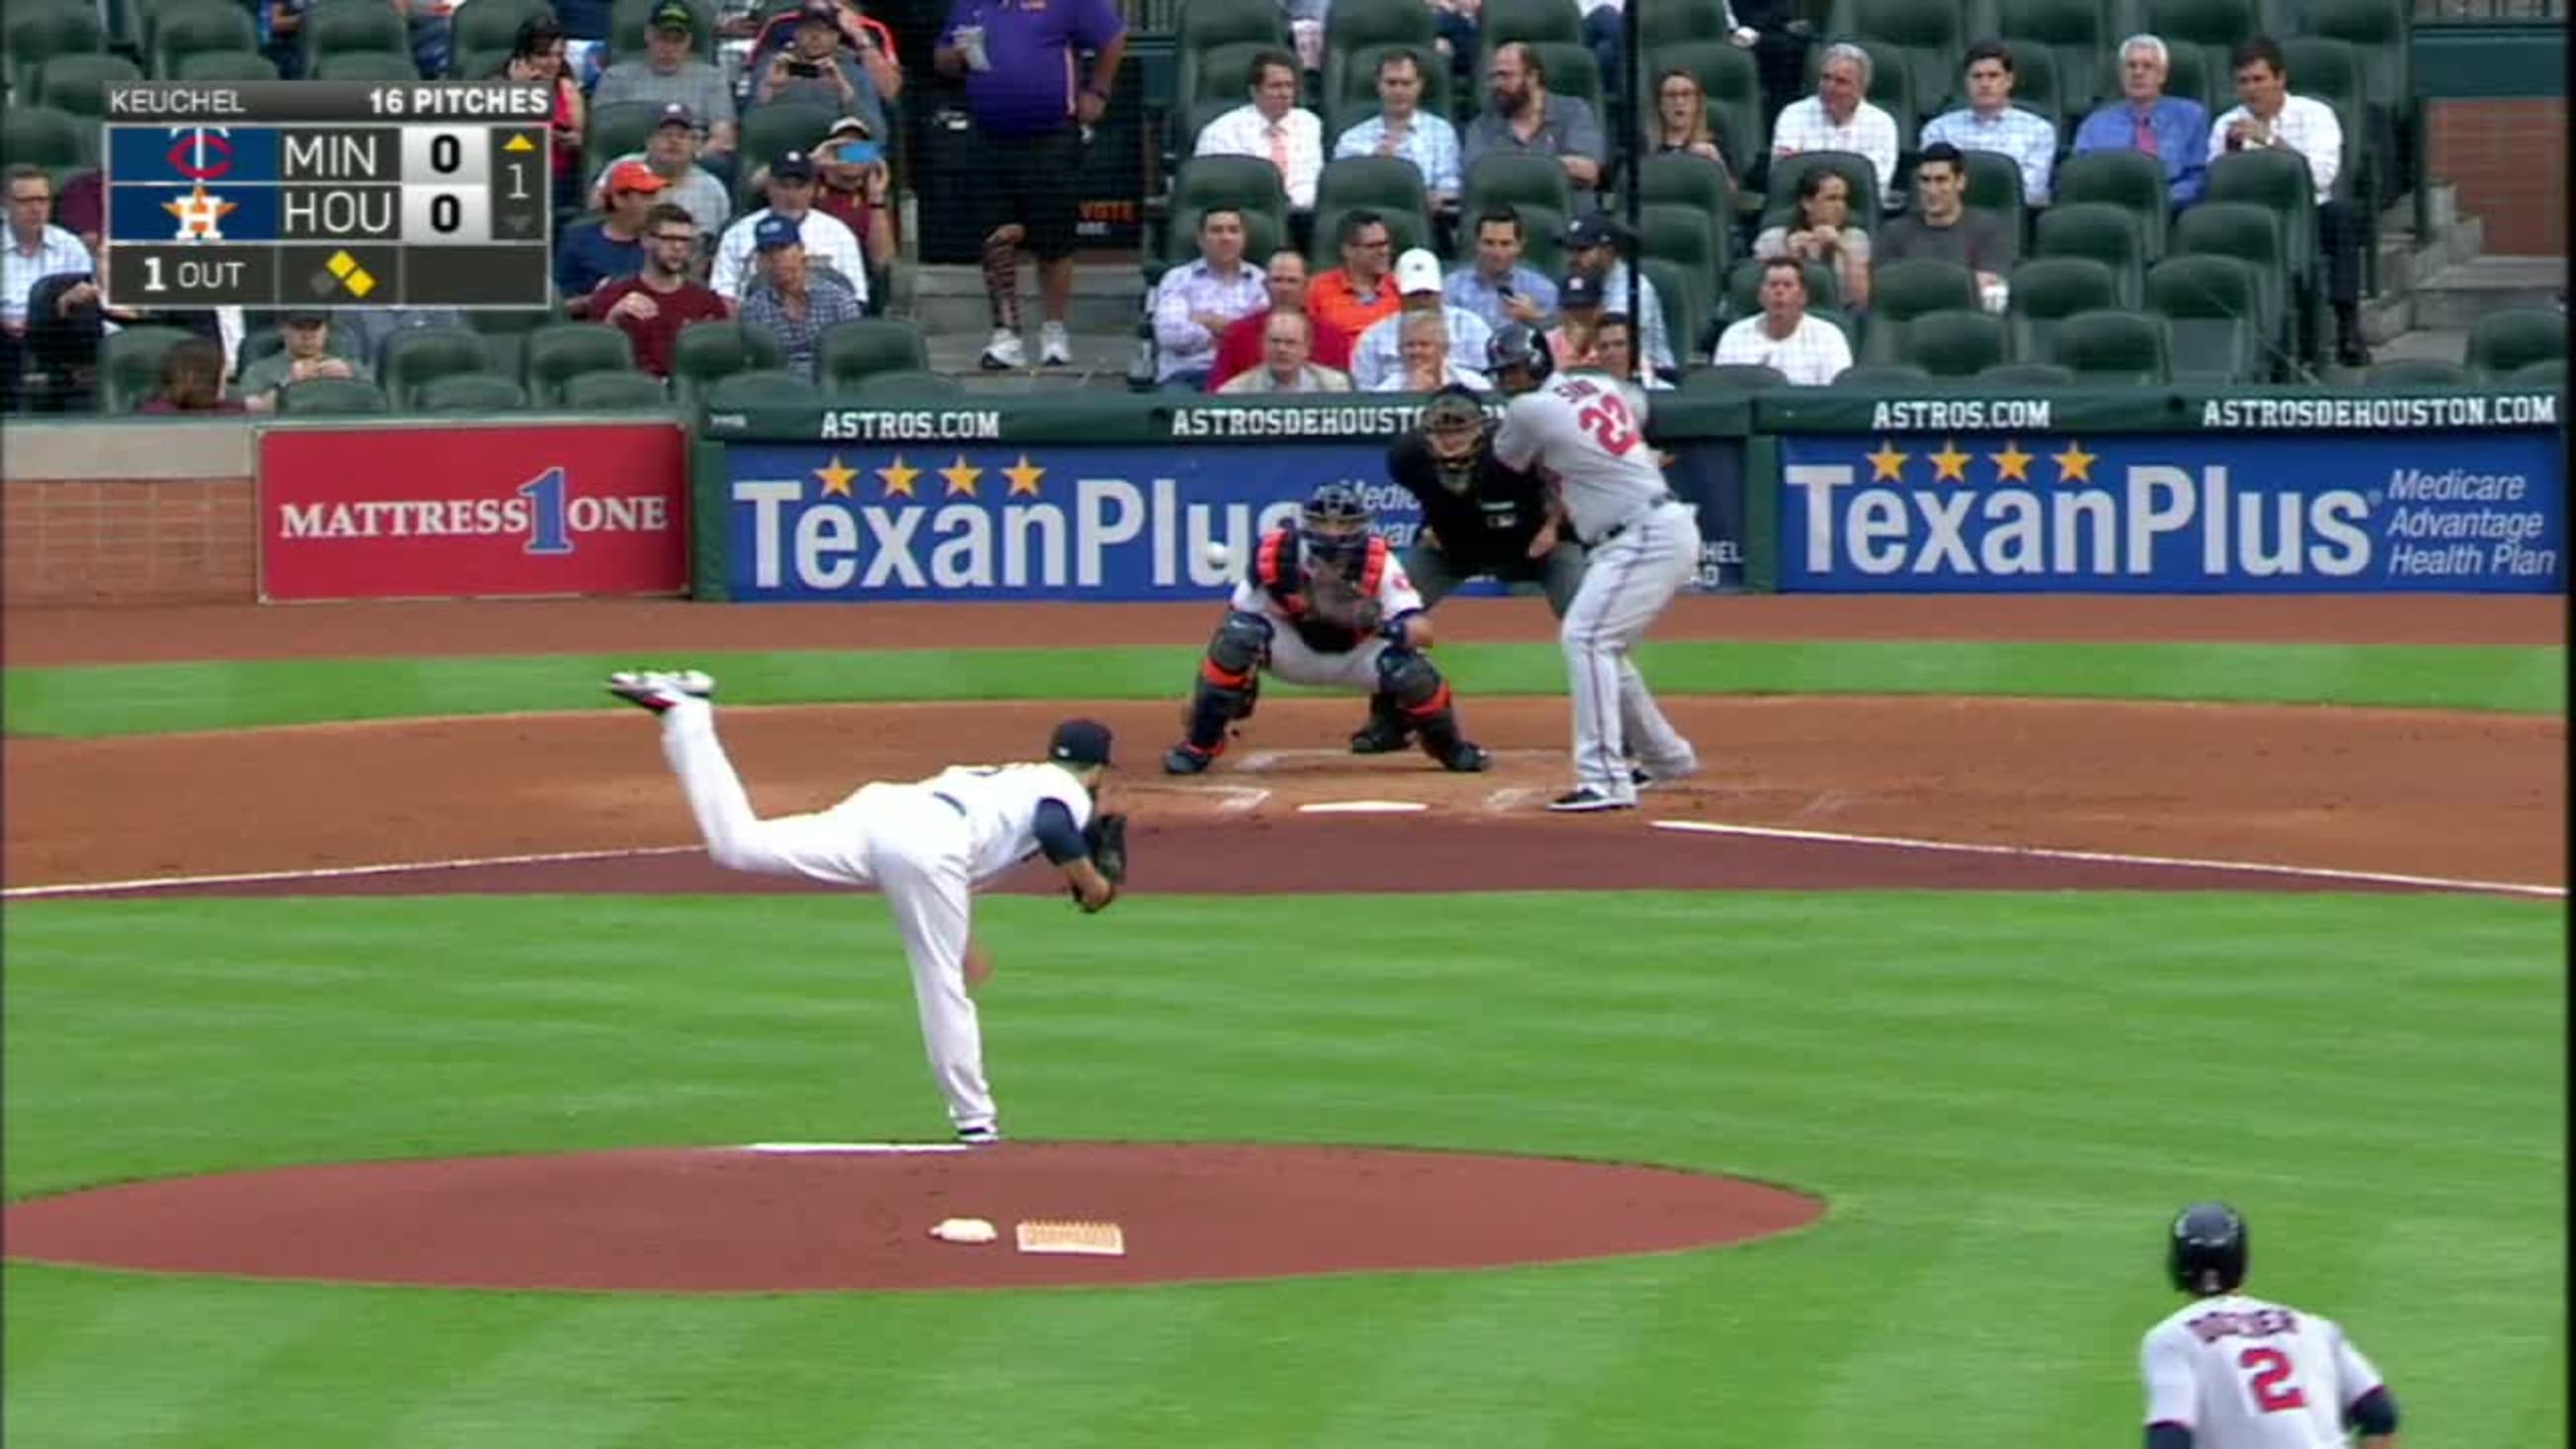 Joe Mauer's children throw out the 1st pitch : r/minnesotatwins